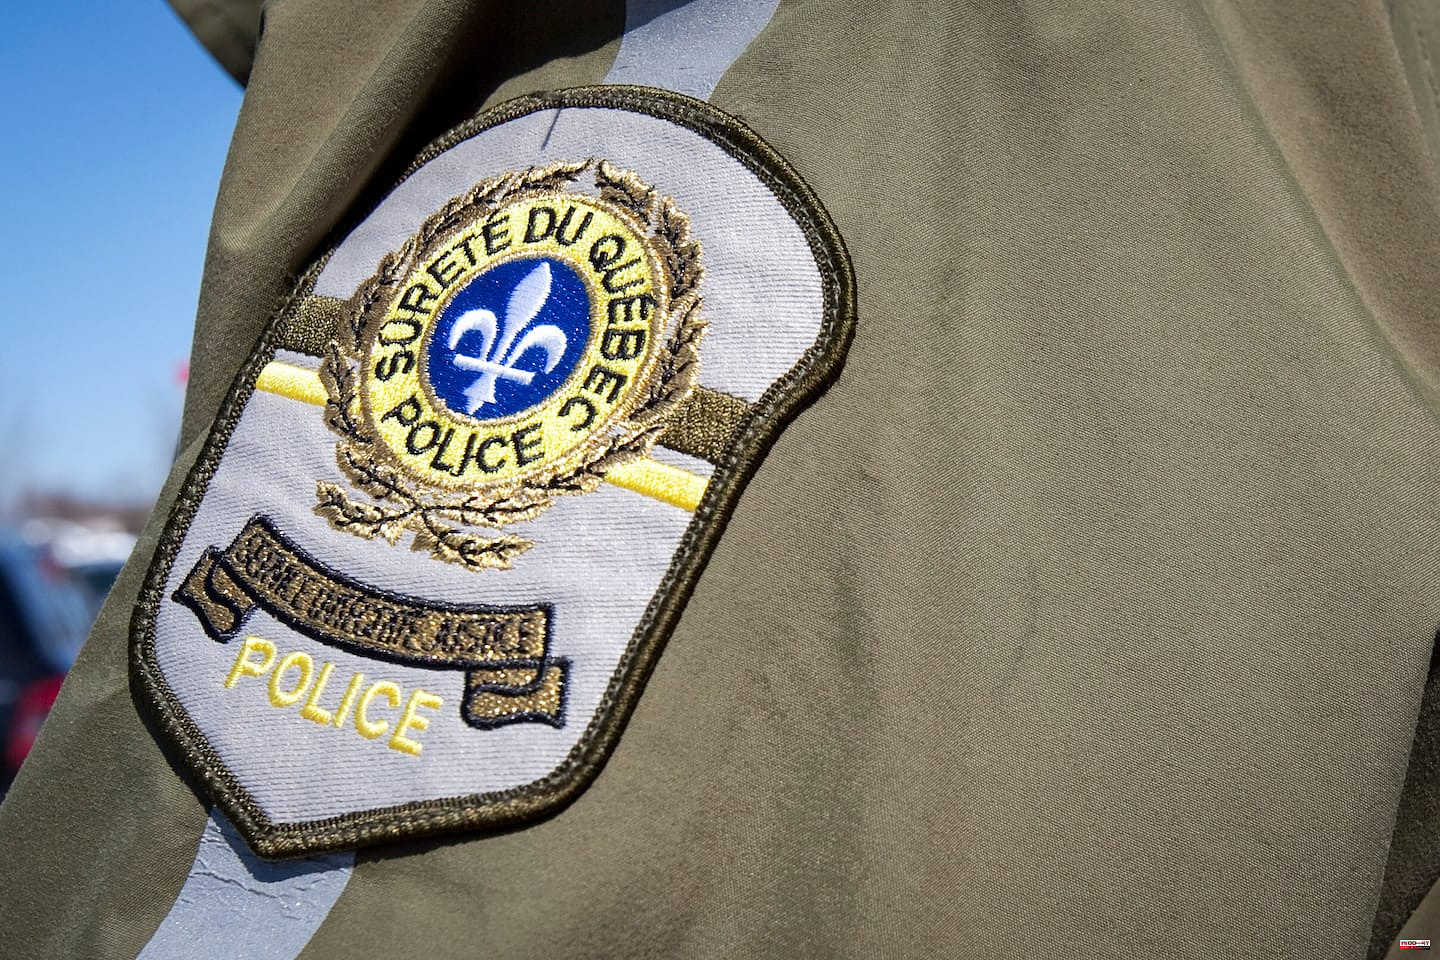 Child pornography: a 43-year-old man from Magog is apprehended